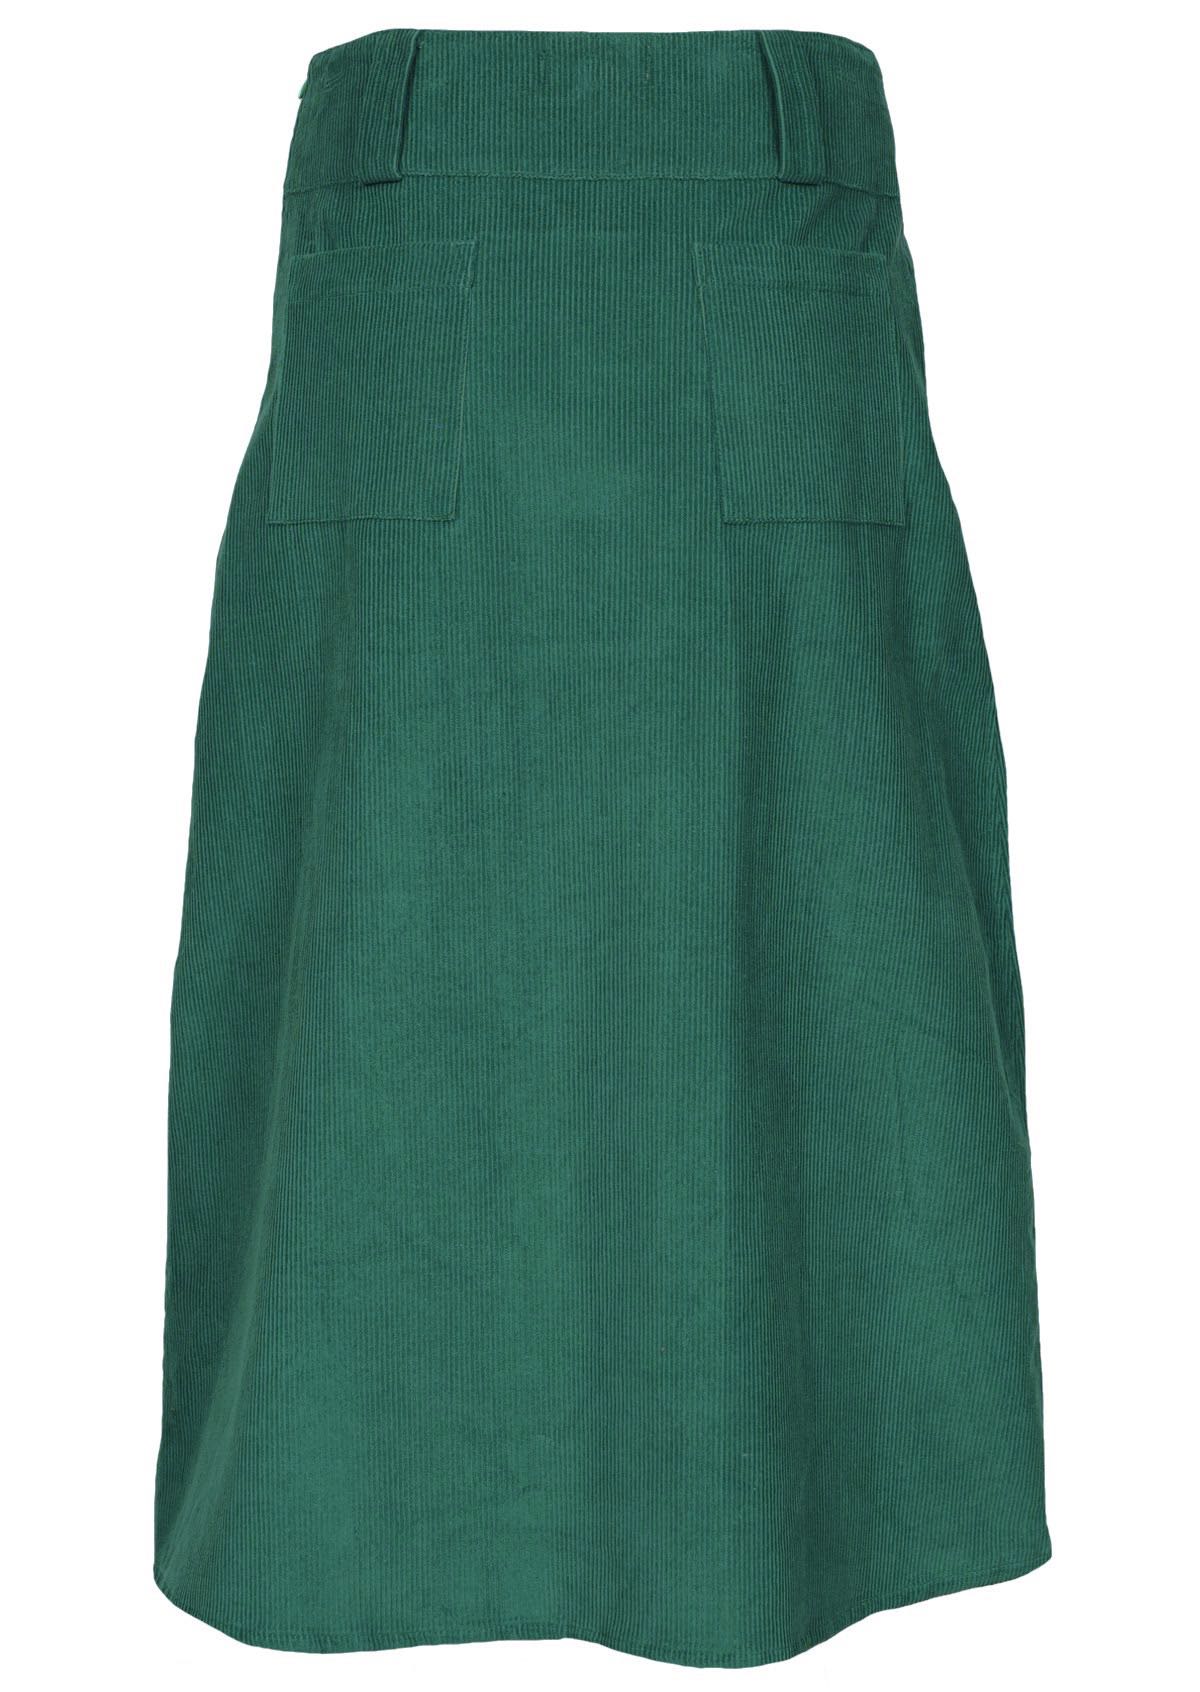 Green coloured skirt features back pockets and a side zip. 